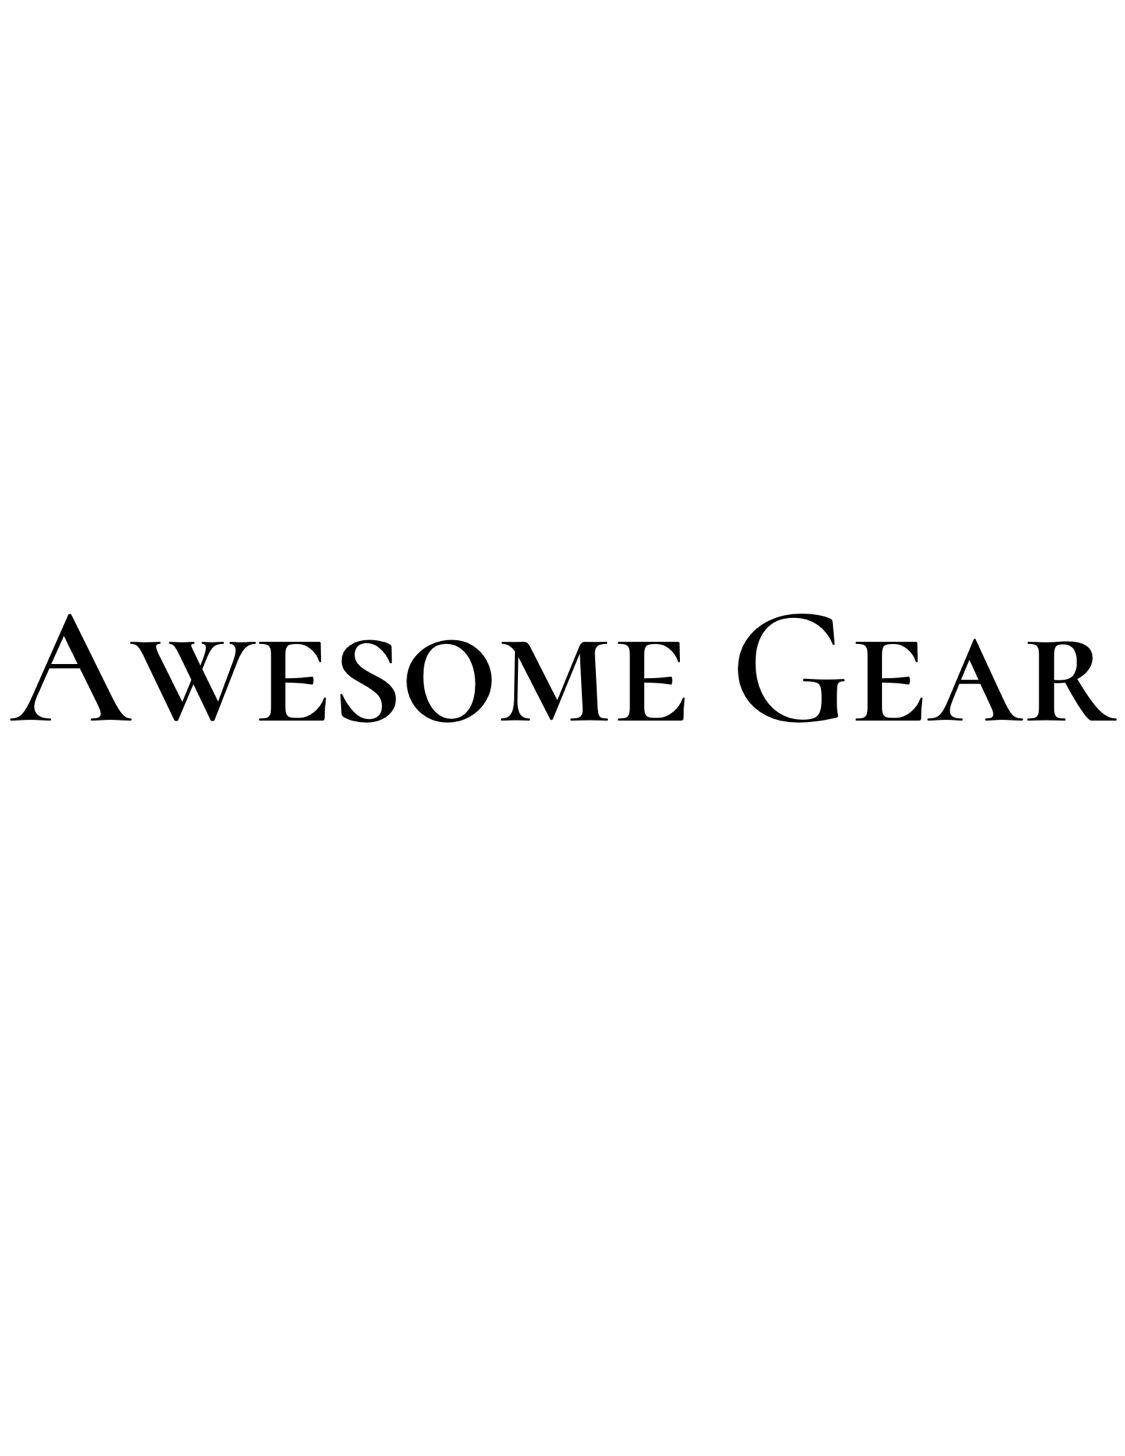 AWESOME GEAR